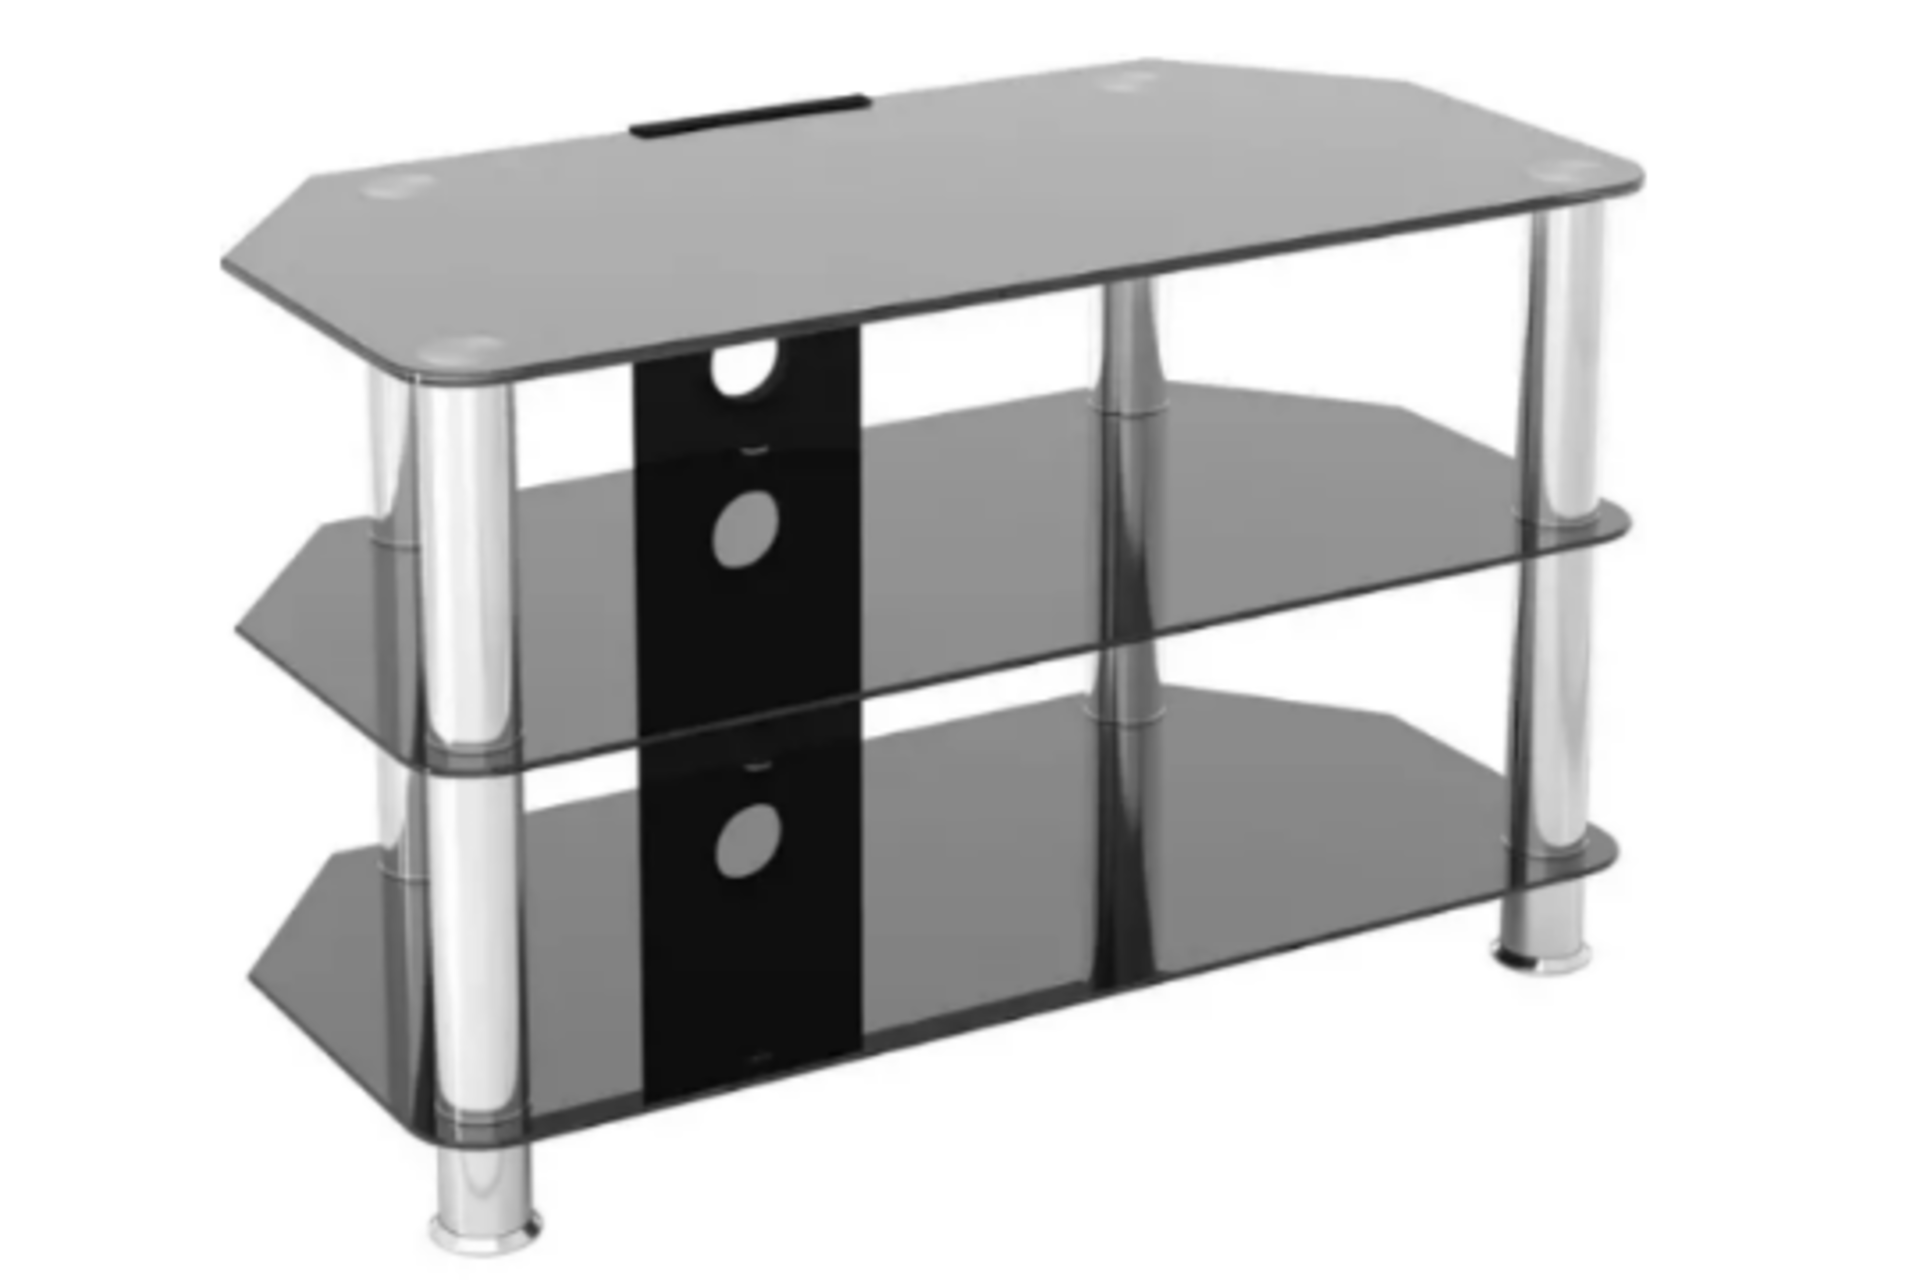 2 x NEW LIVING GLASS TV STANDS. BLACK TEMPERED GLASS WITH STAINLESS STEEL LEGS. EASY TO ASSEMBLE. - Image 2 of 5